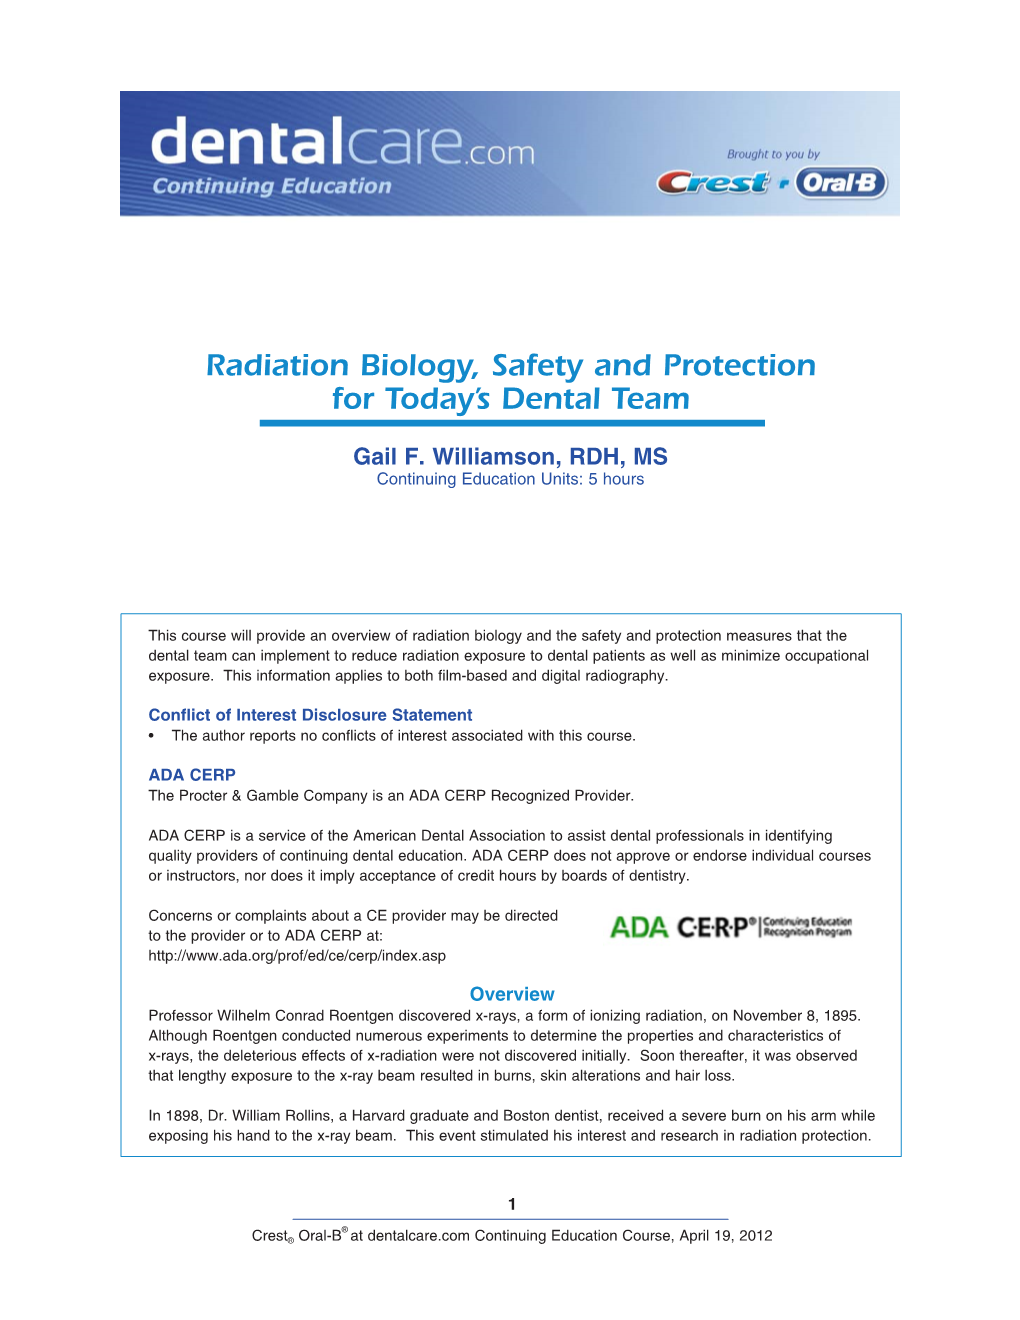 Radiation Biology, Safety and Protection for Today's Dental Team